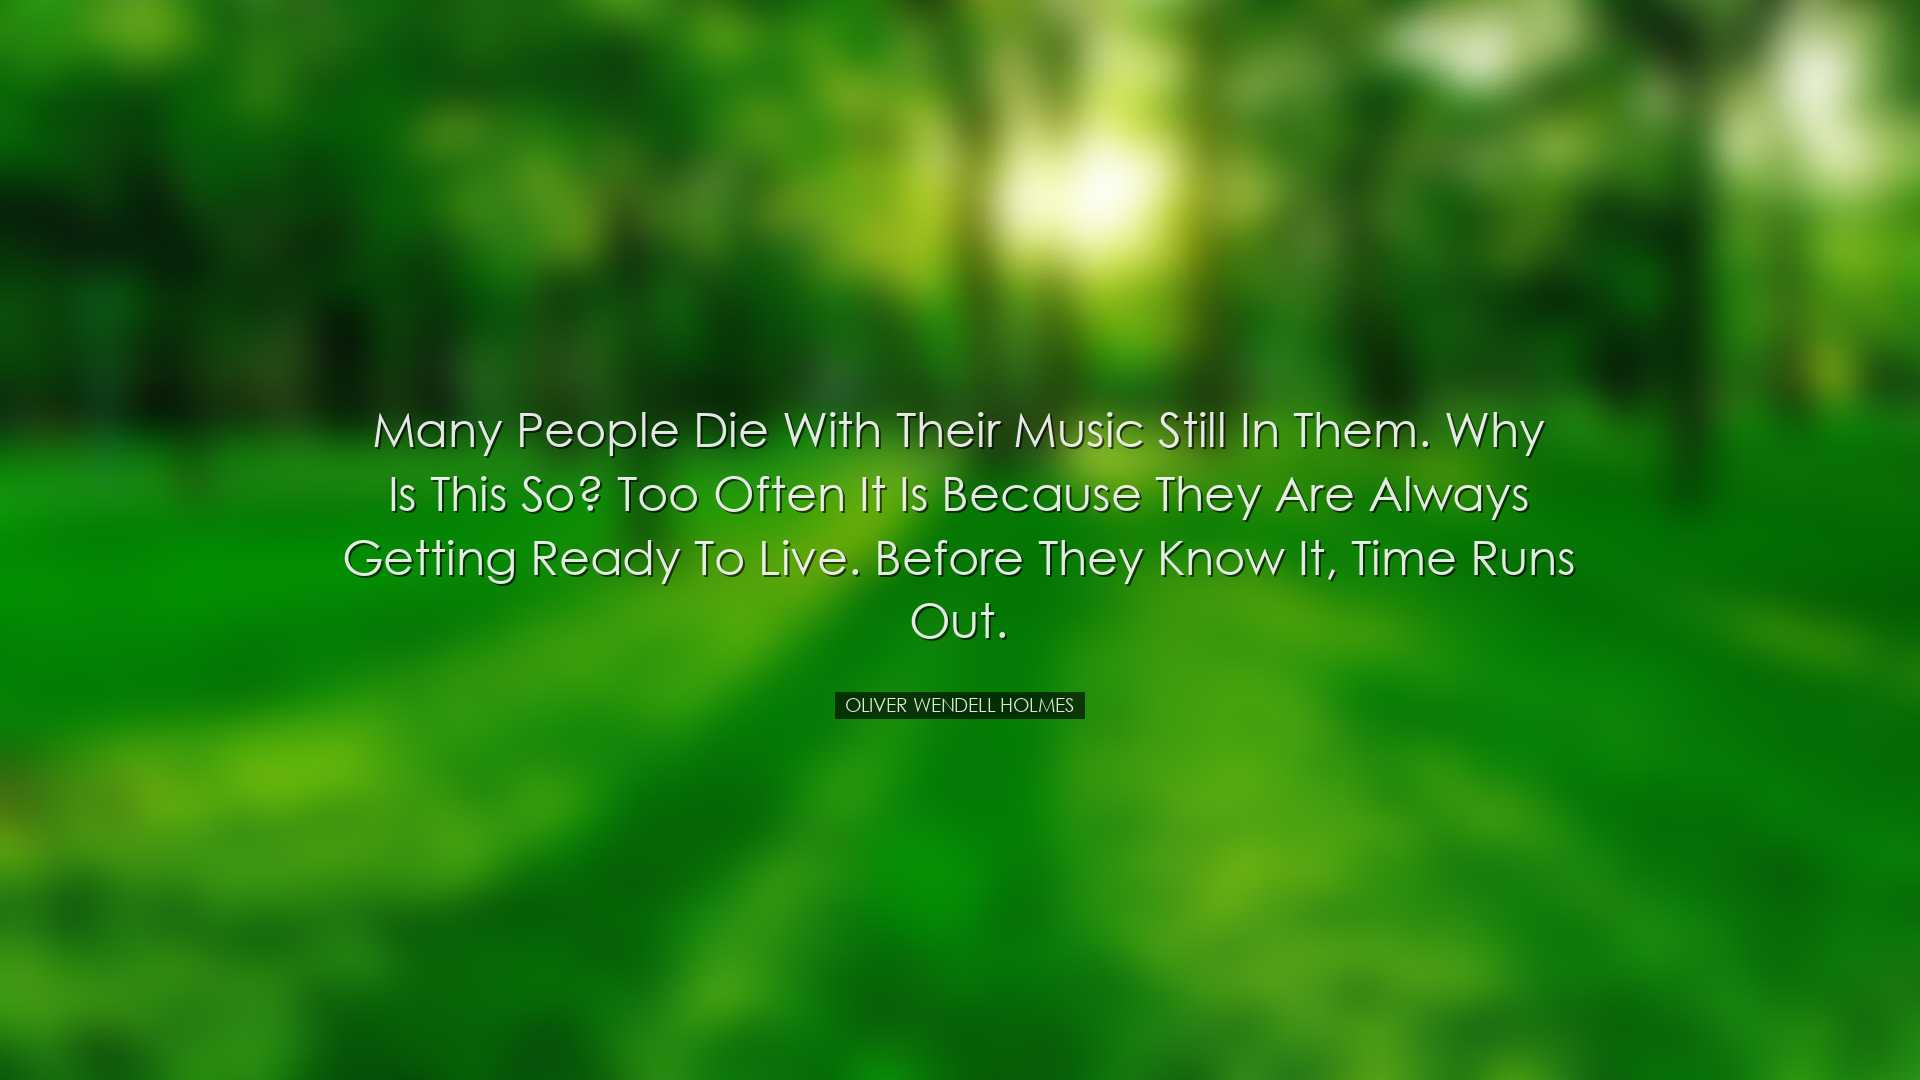 Many people die with their music still in them. Why is this so? To